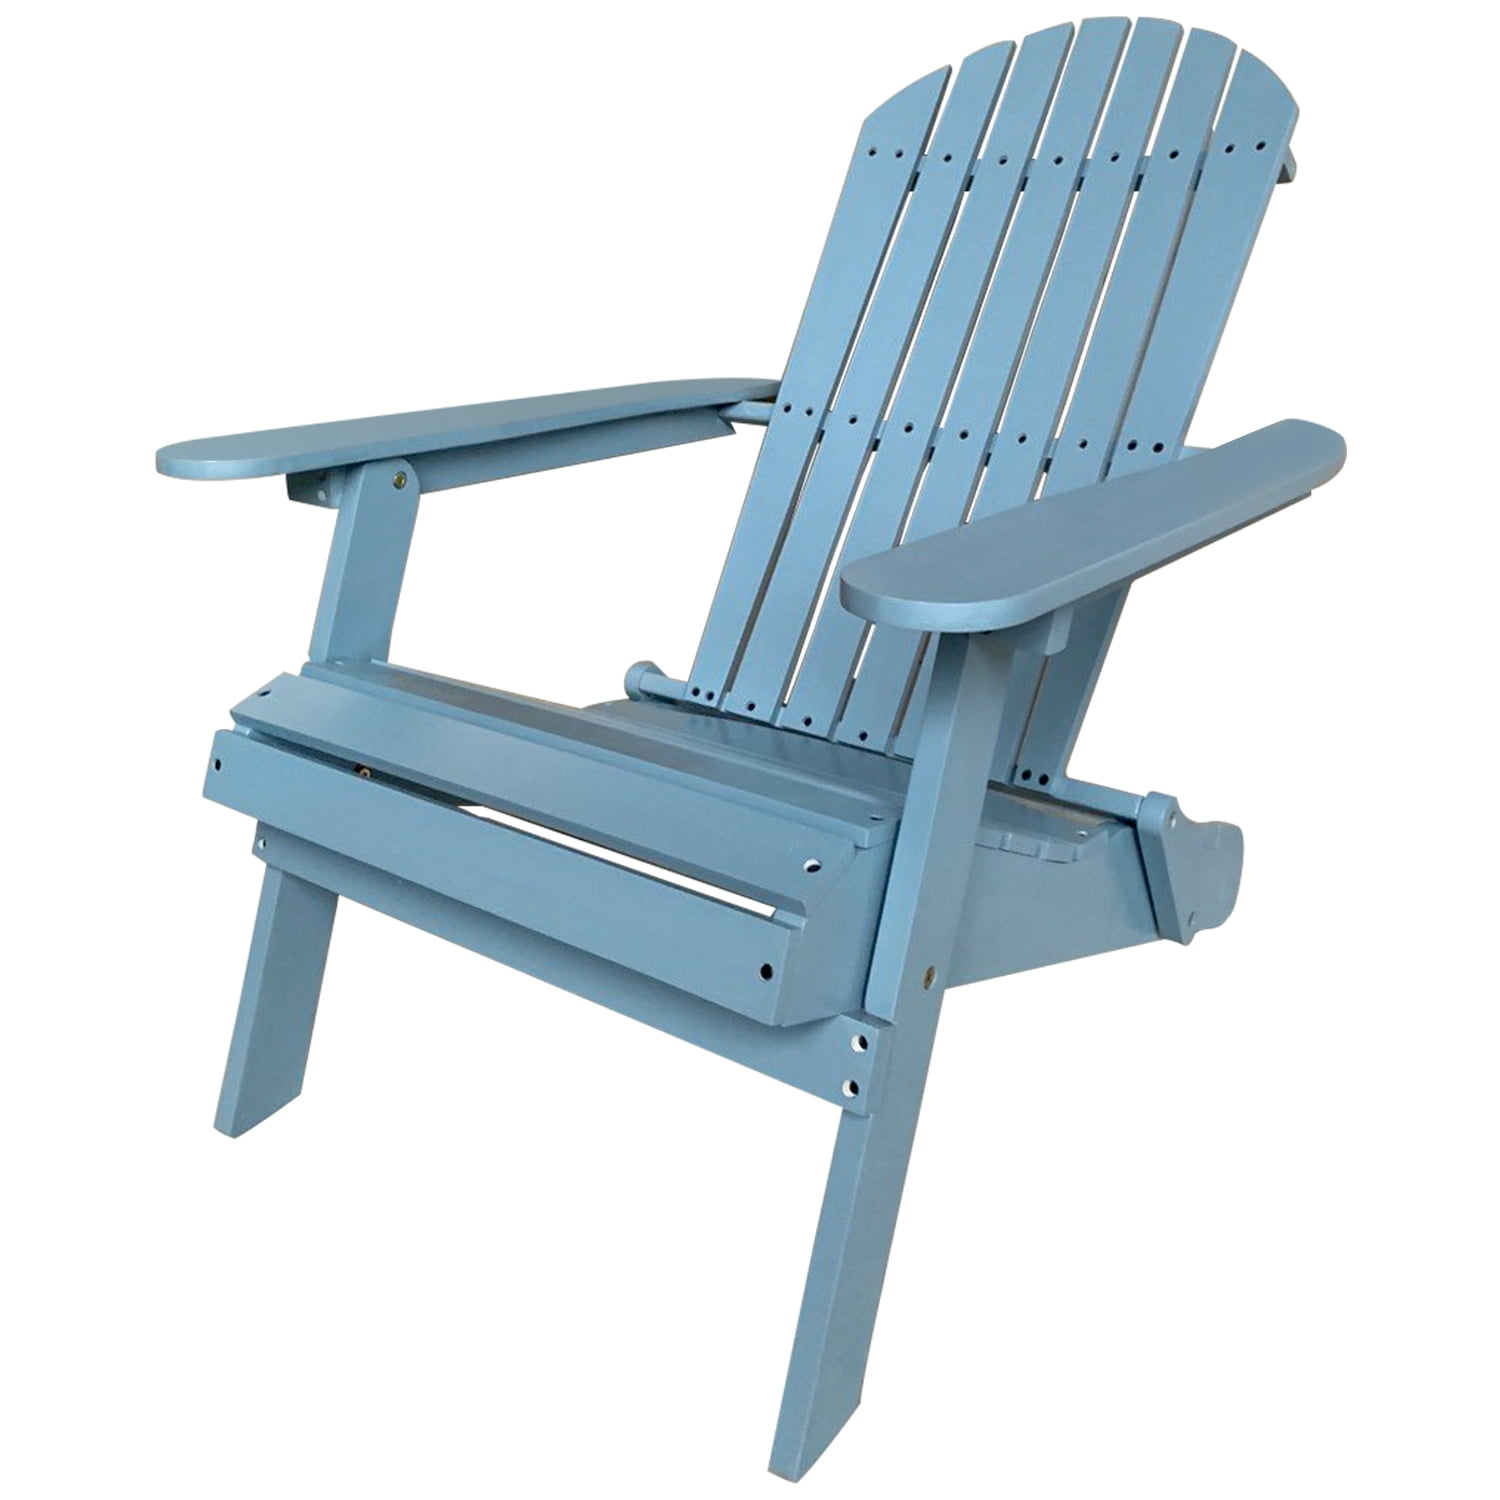 Foldable Wooden Adirondack Chair Outdoor Patio Furniture Lounge Seat Deck Pool 